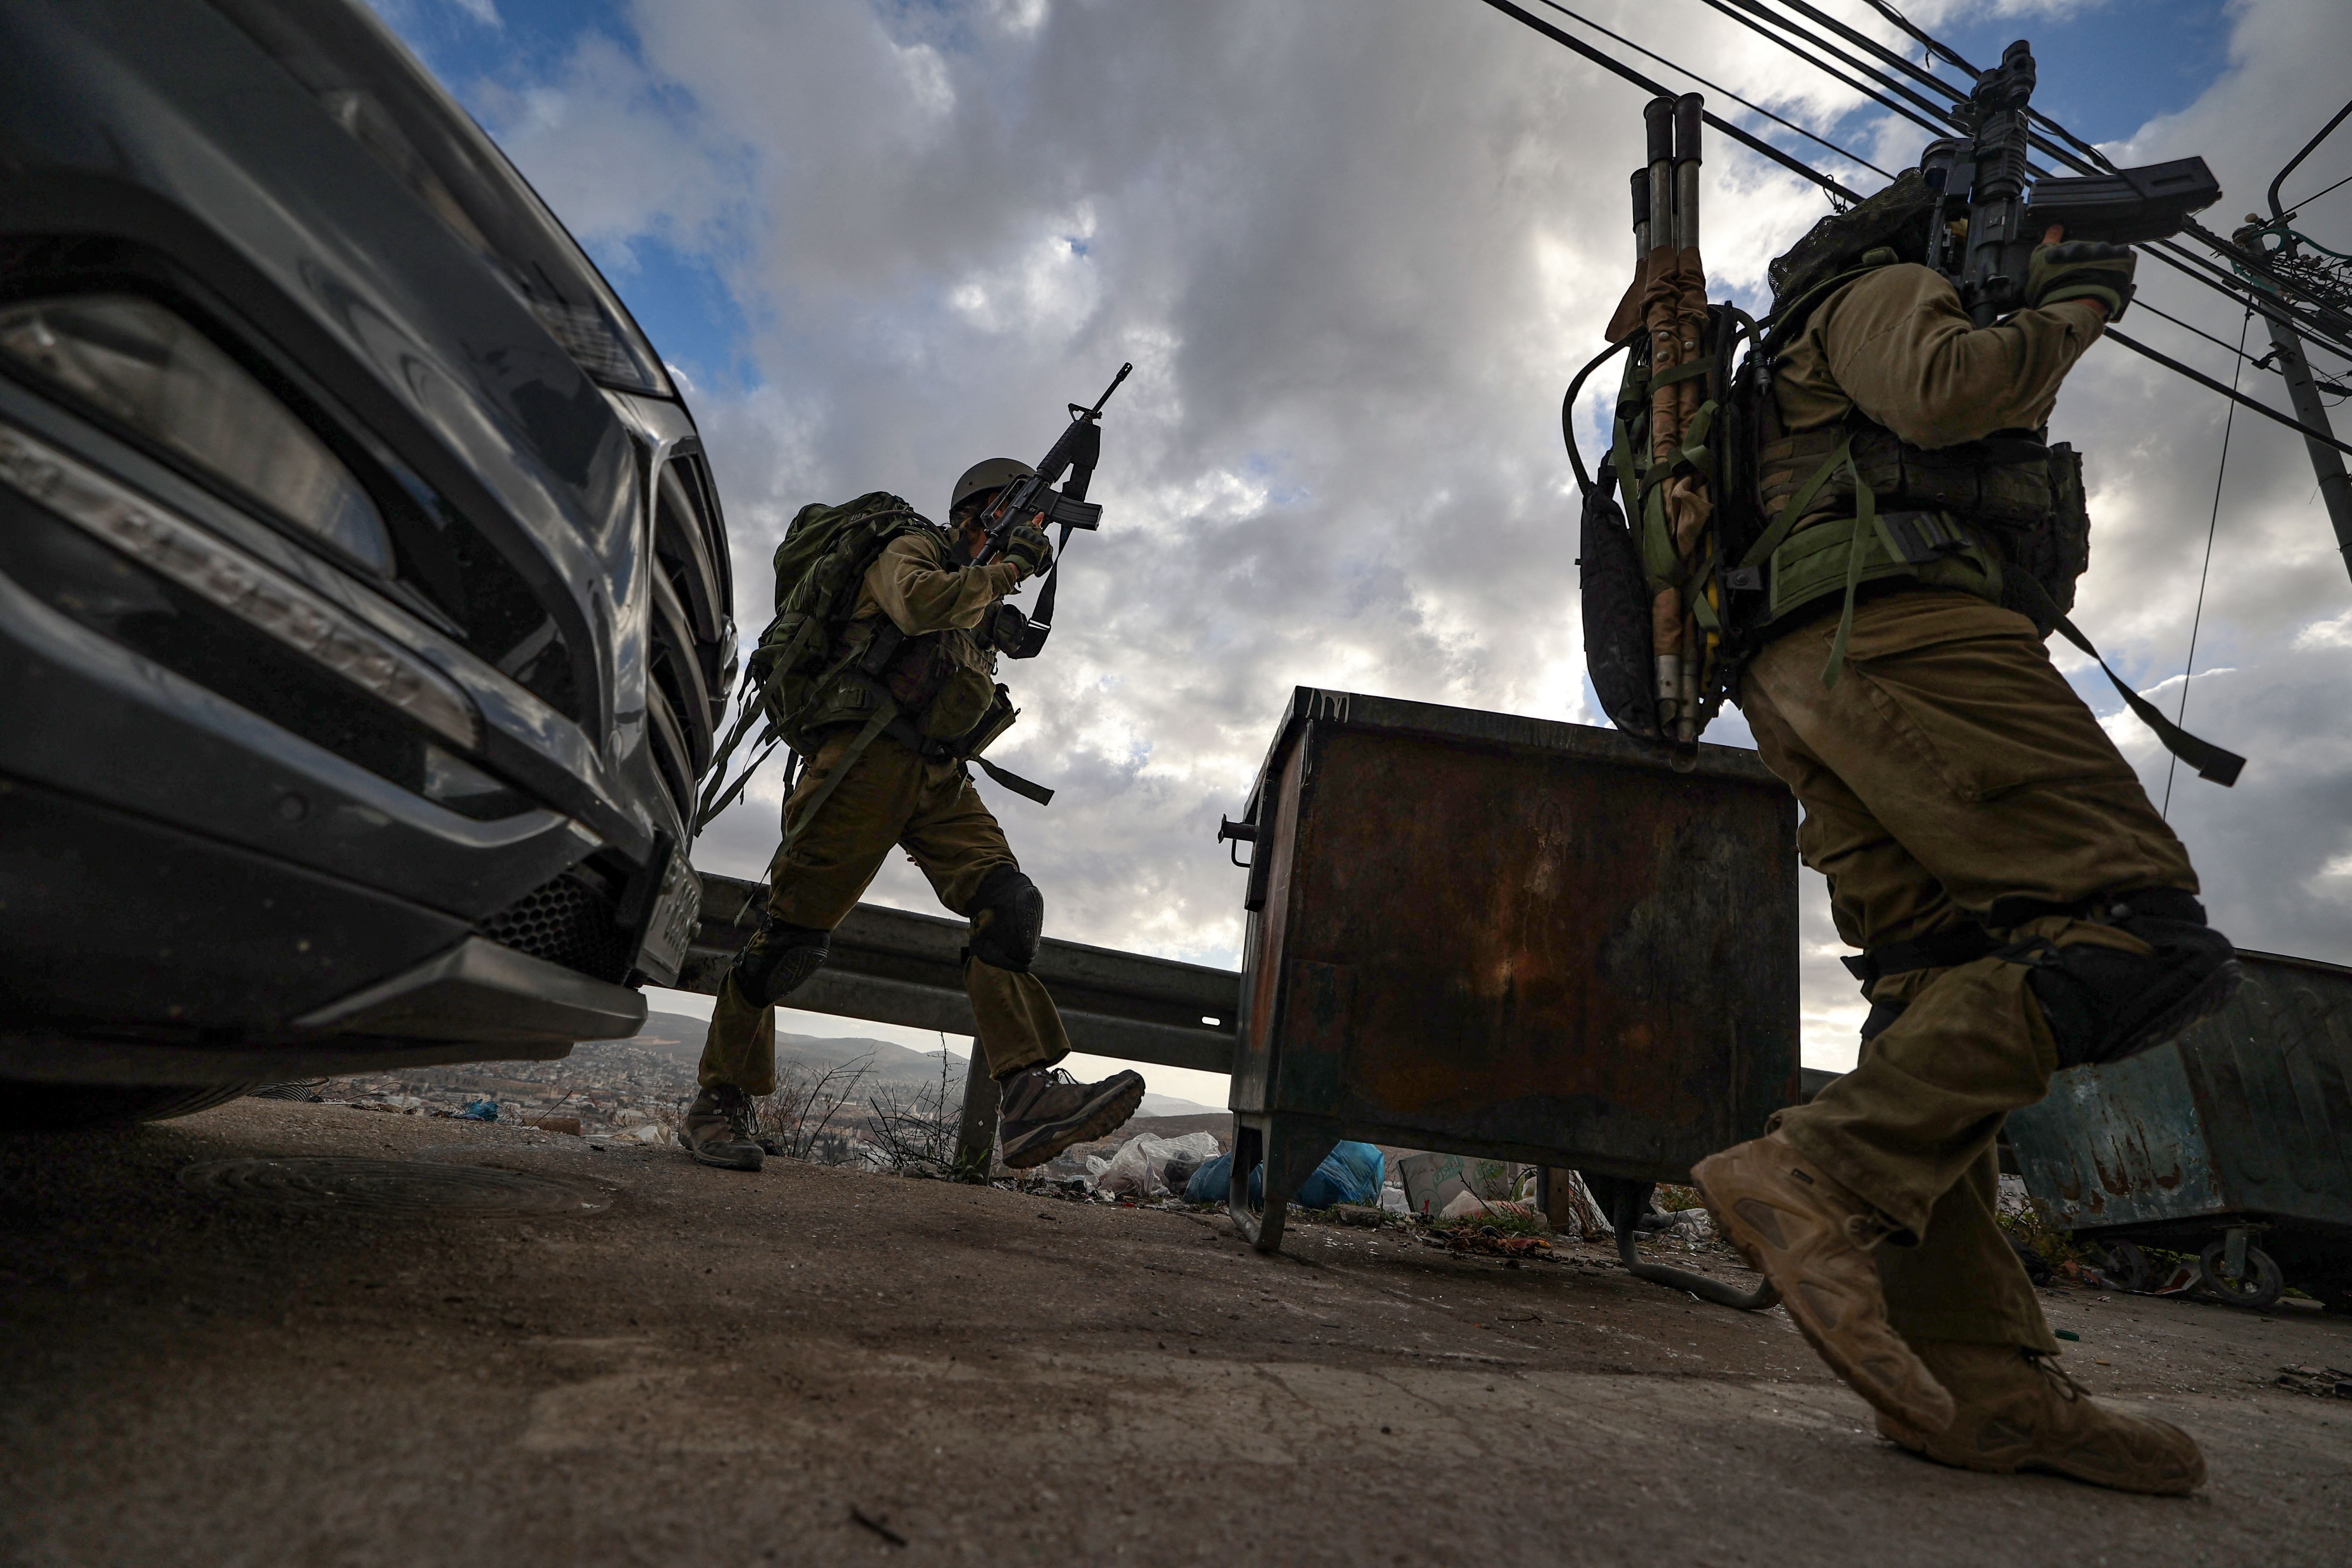 Soldiers holding up weapons and walking down a street in the West Bank. 